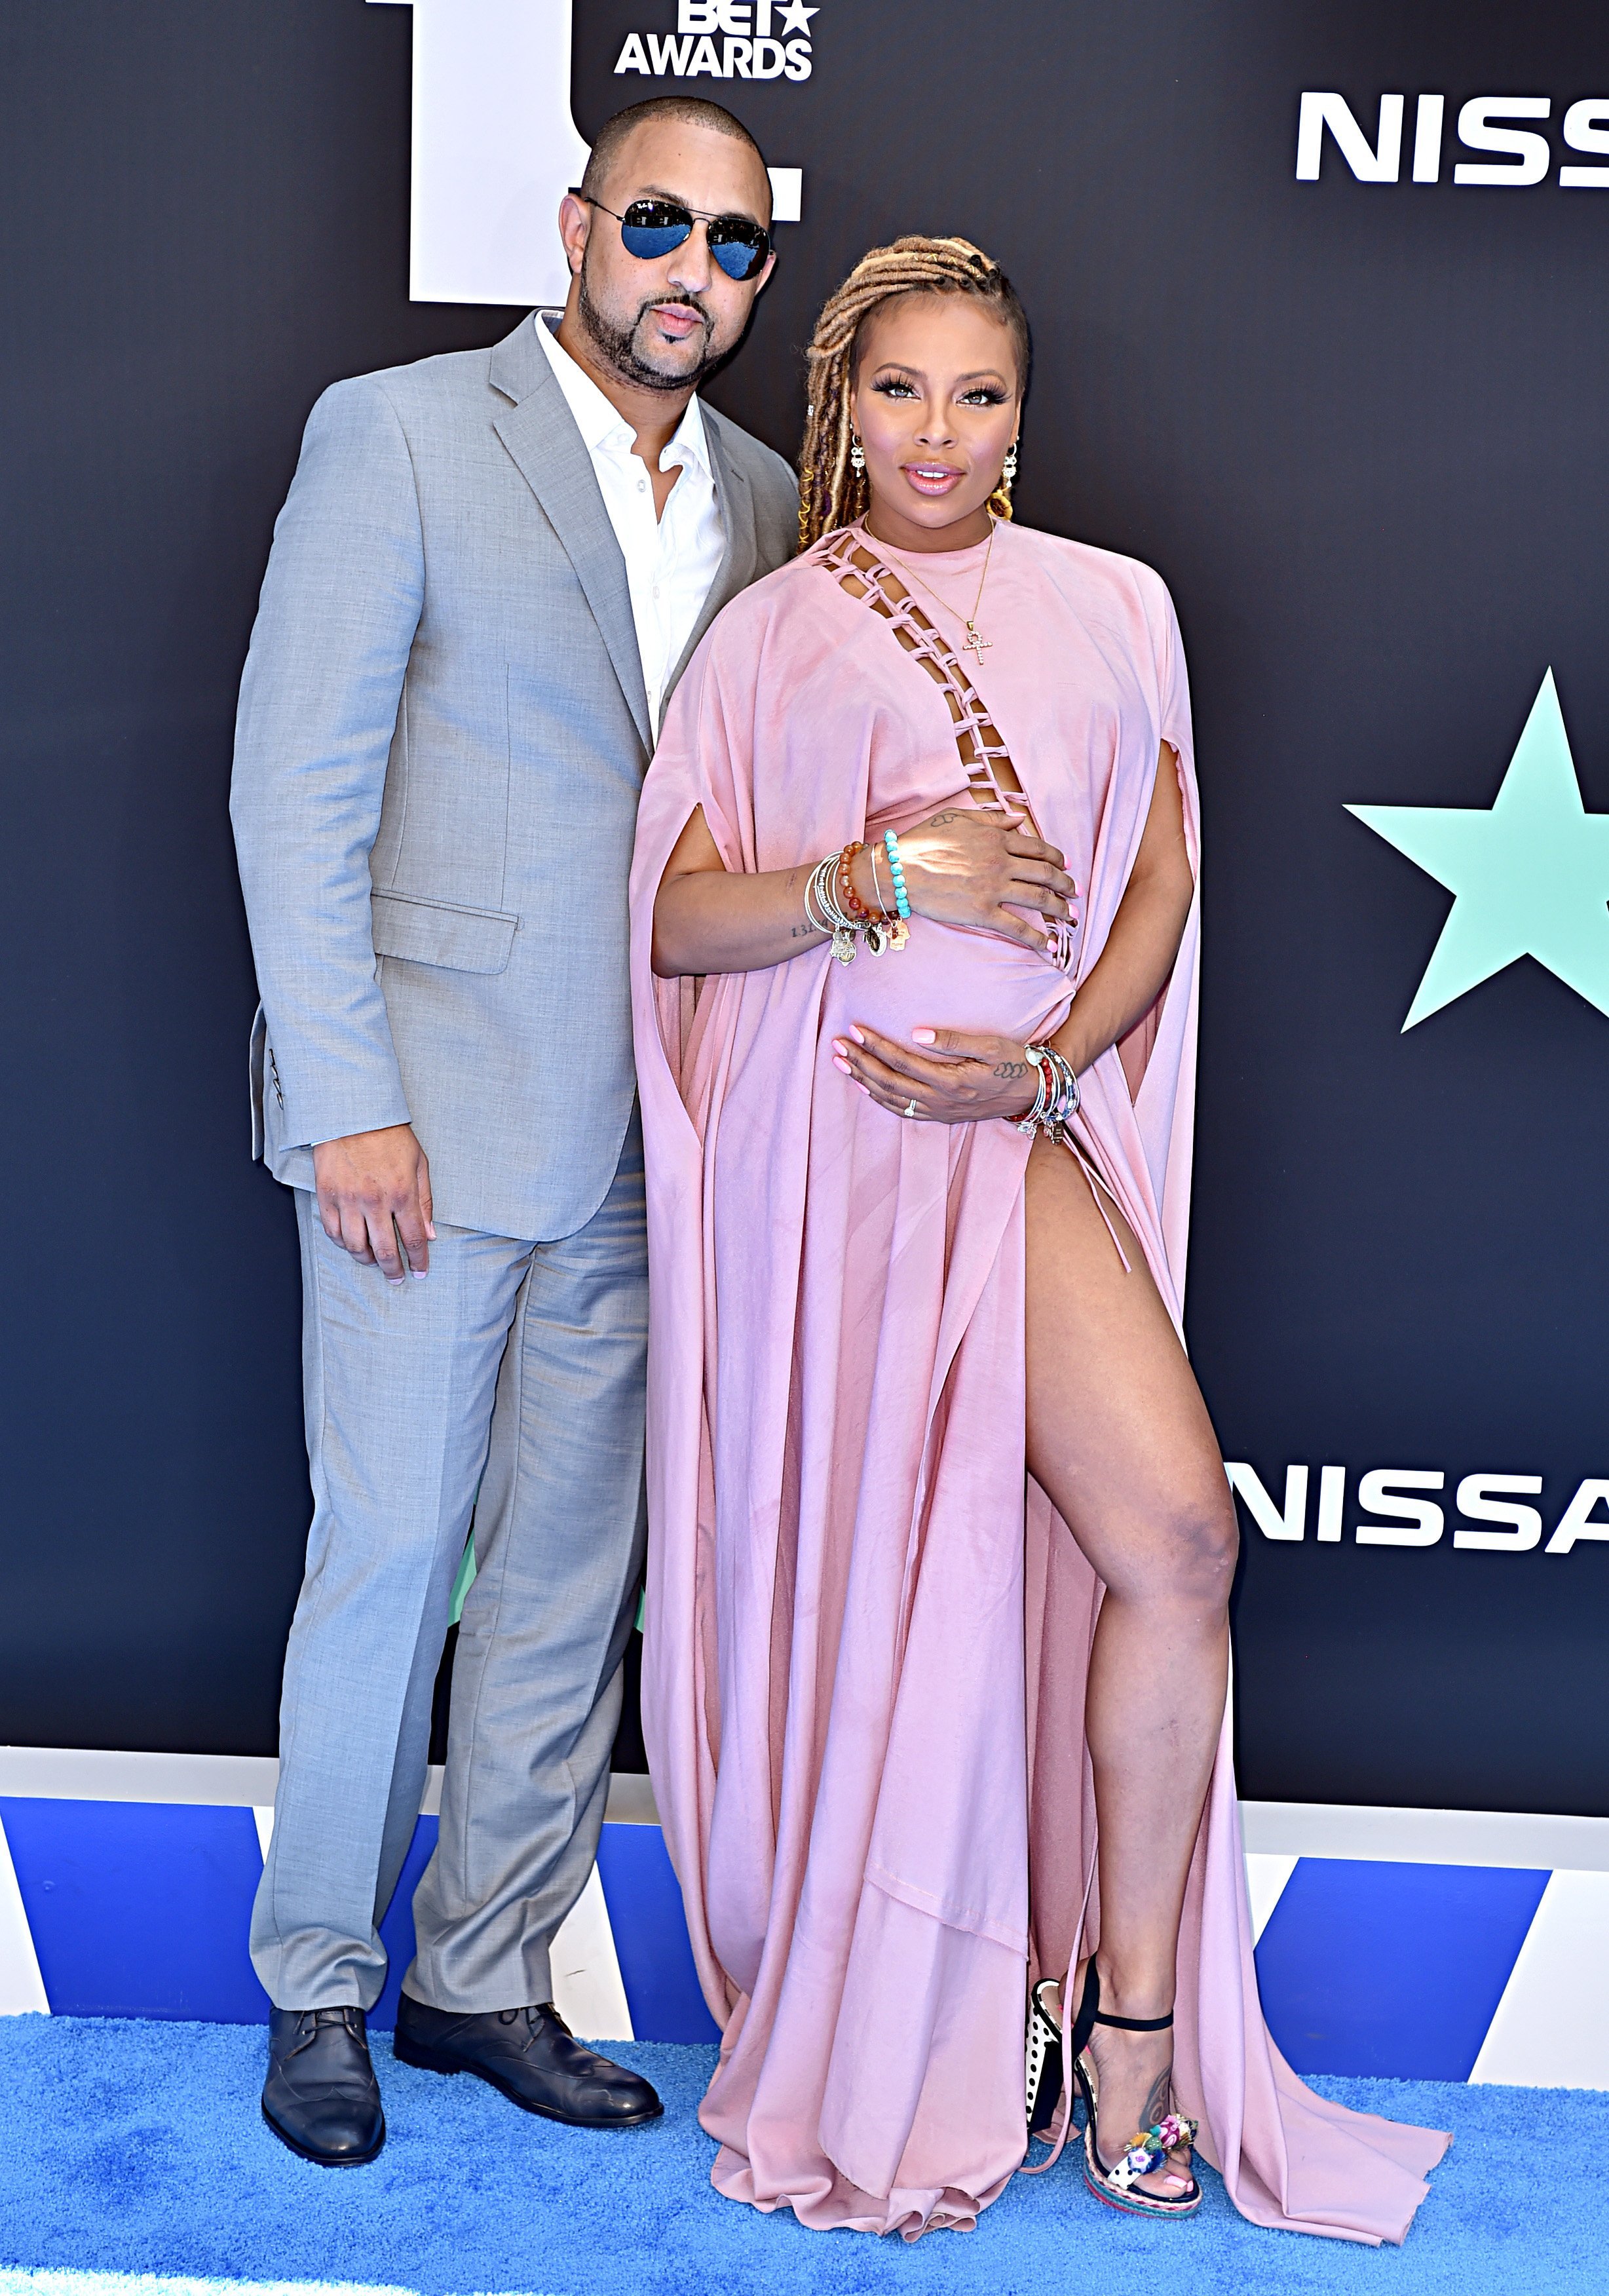 Pregnant Eva Marcille Was All Bump and Legs in HighSlit Gown at 2019